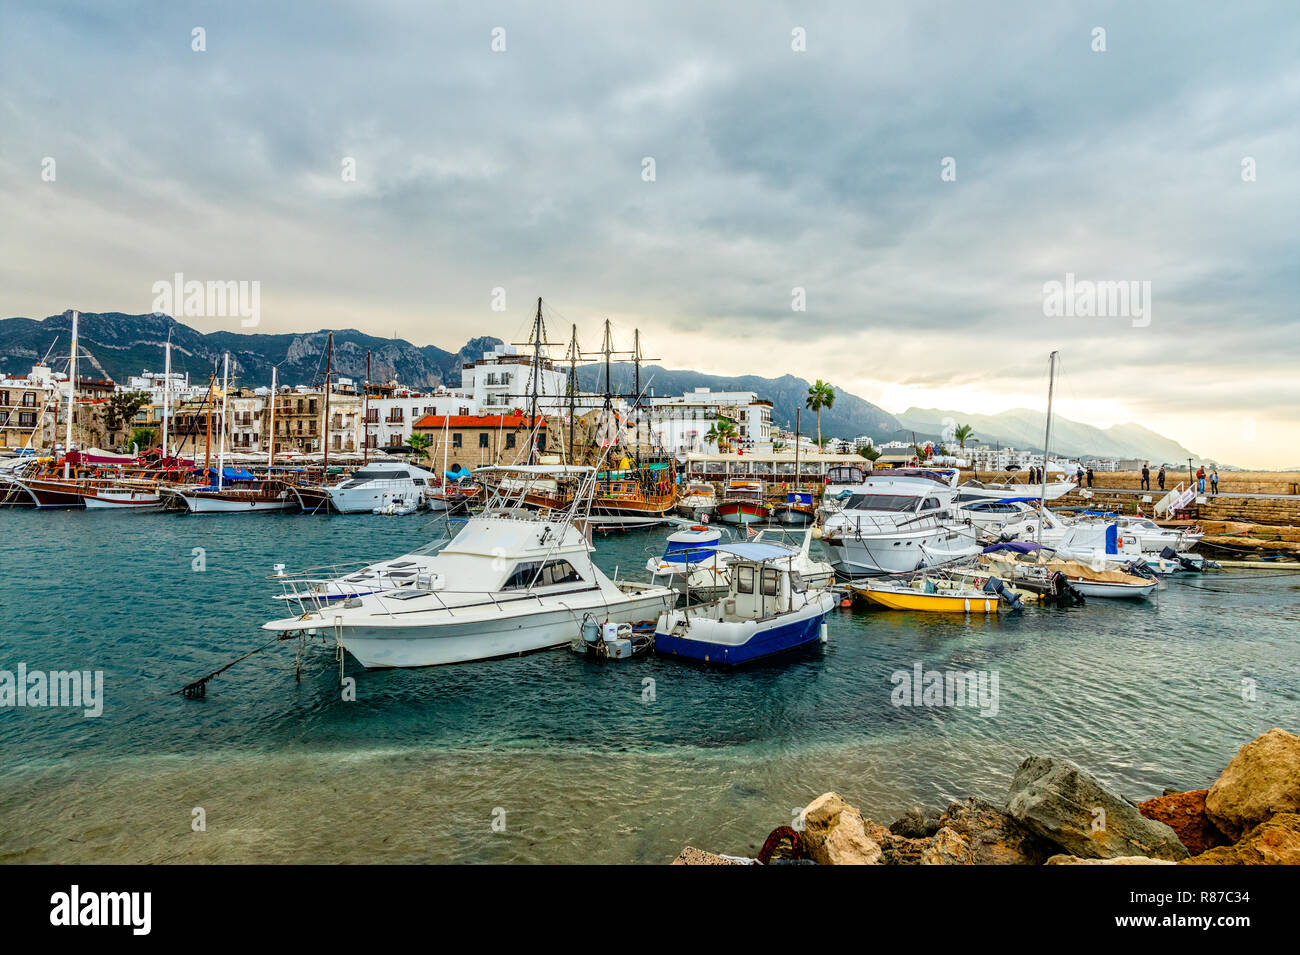 Kyrenia or Girne  historical city center, view to marina with many yachts and boats with mountains in the background, North Cyprus Stock Photo